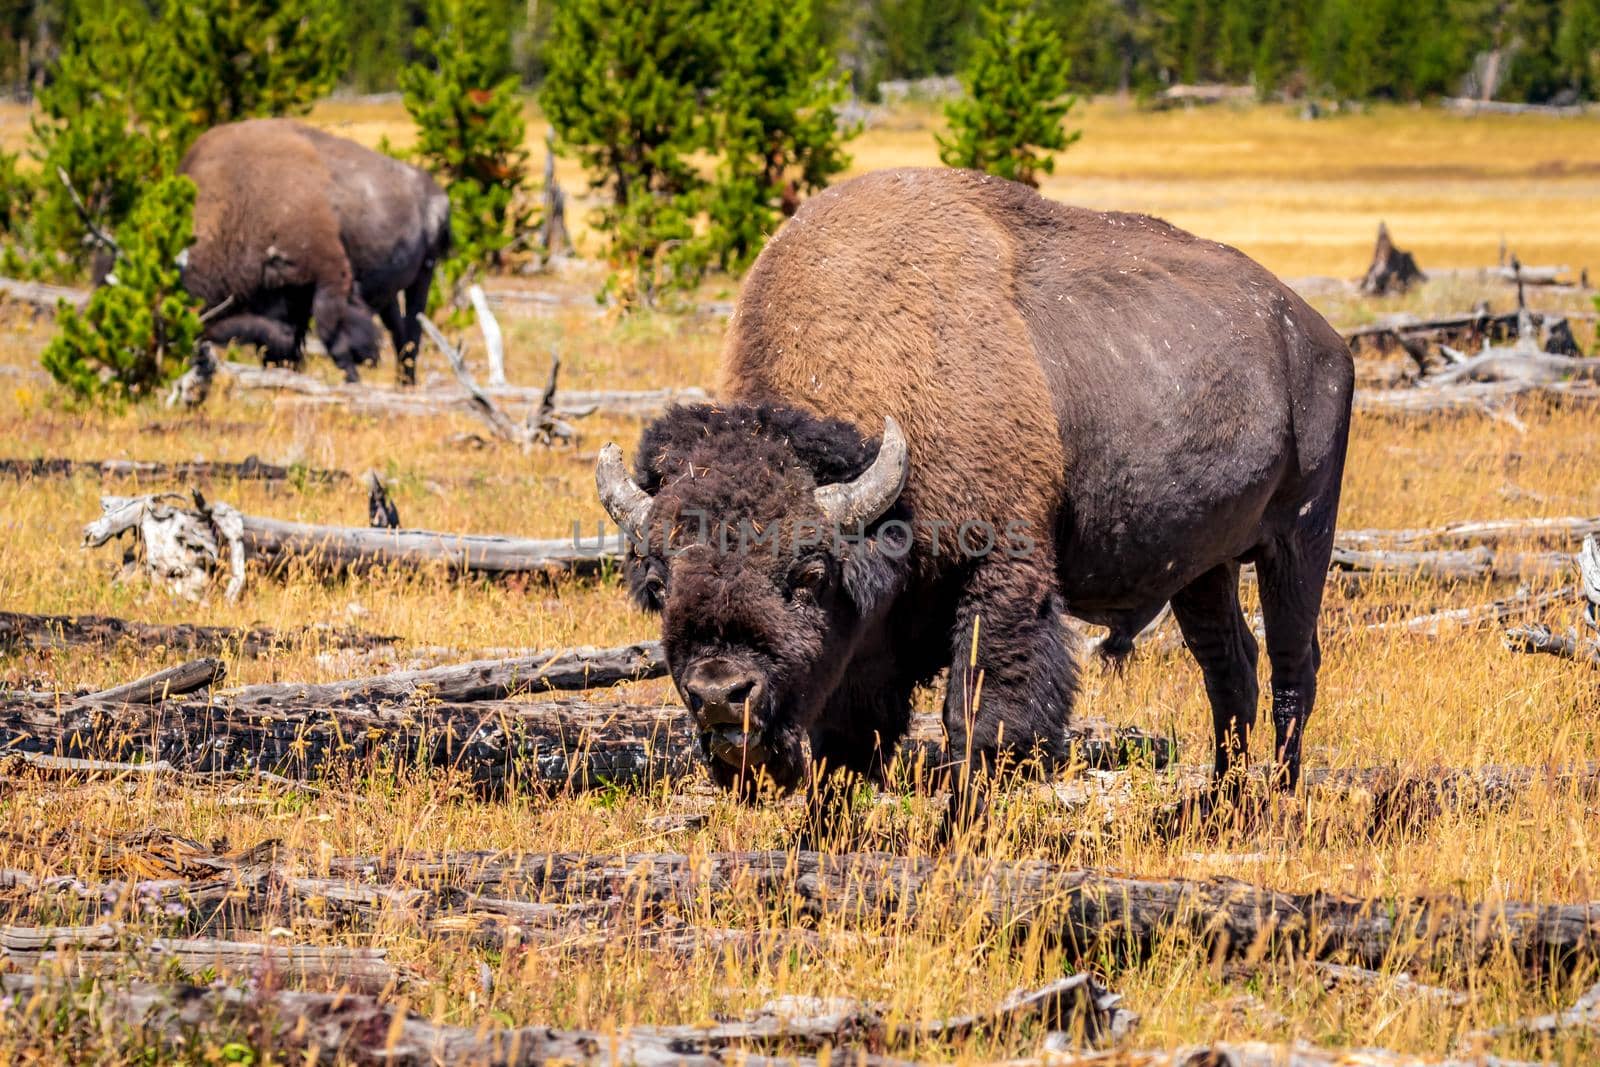 Wild Bison at Yellowstone by gepeng